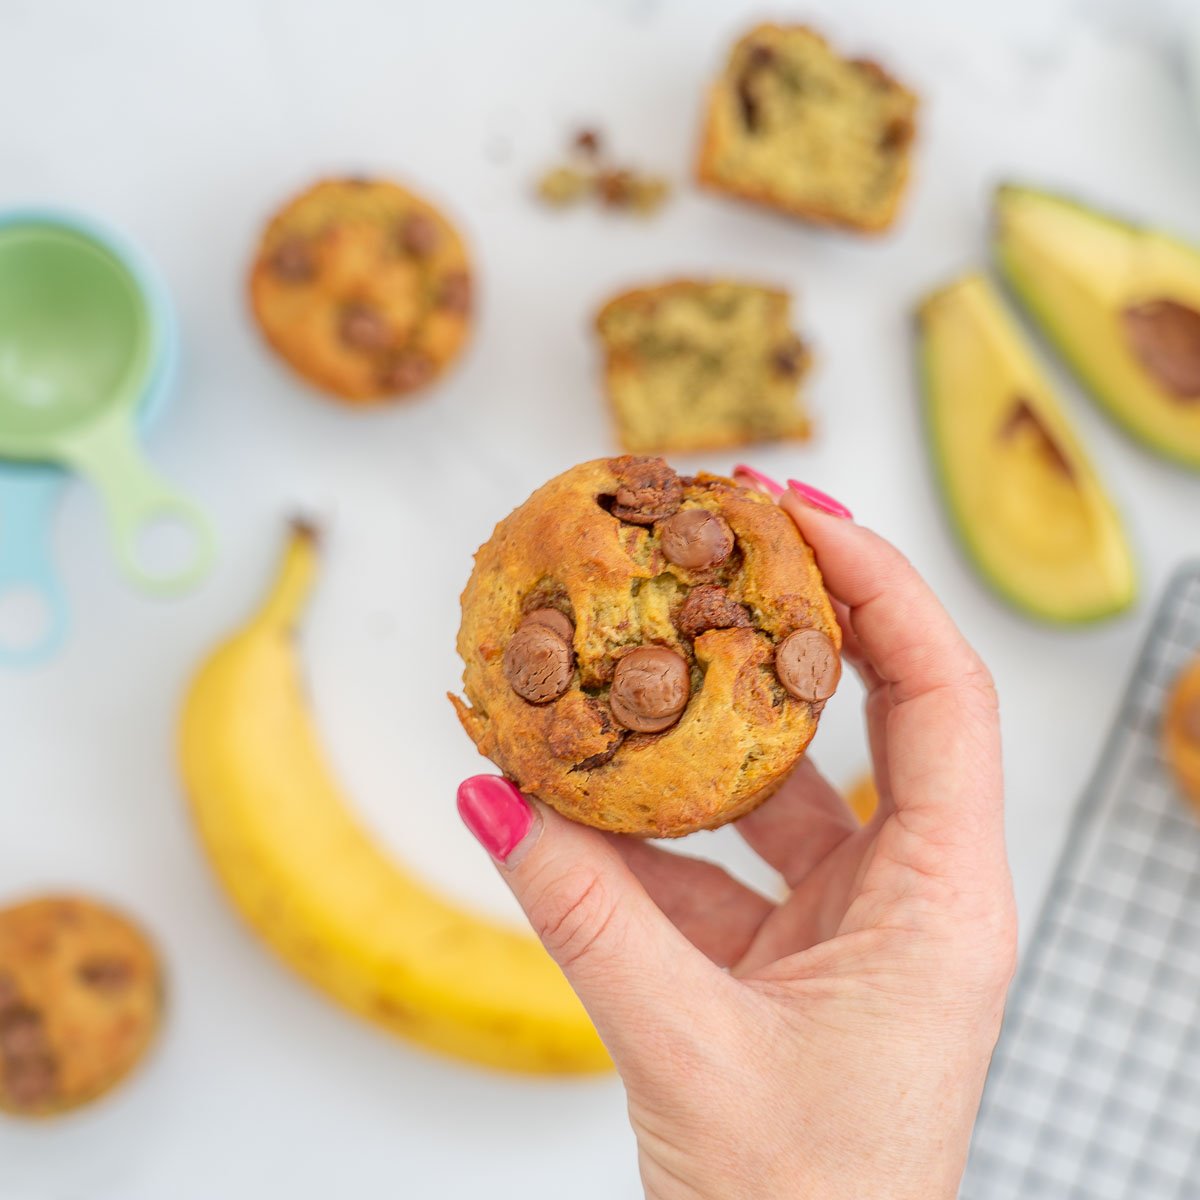 Woman's hand holding a muffin above a bench top covered with muffins, banana and avocado